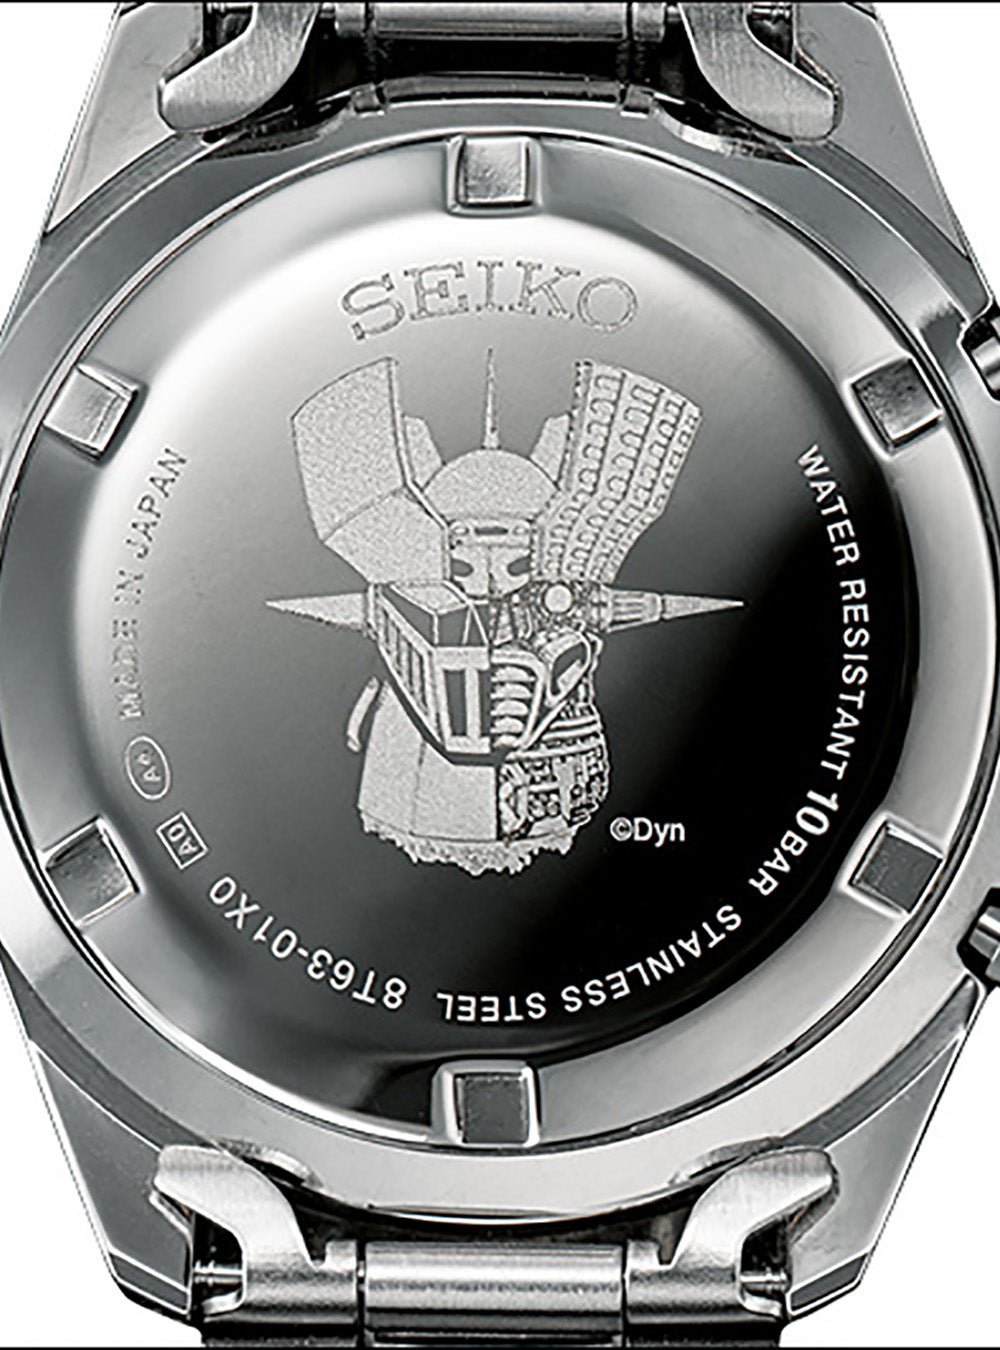 SEIKO x MAZINGER (TRANZOR) Z 50TH ANNIVERSARY MADE IN JAPAN LIMITED EDITIONWRISTWATCHjapan-select